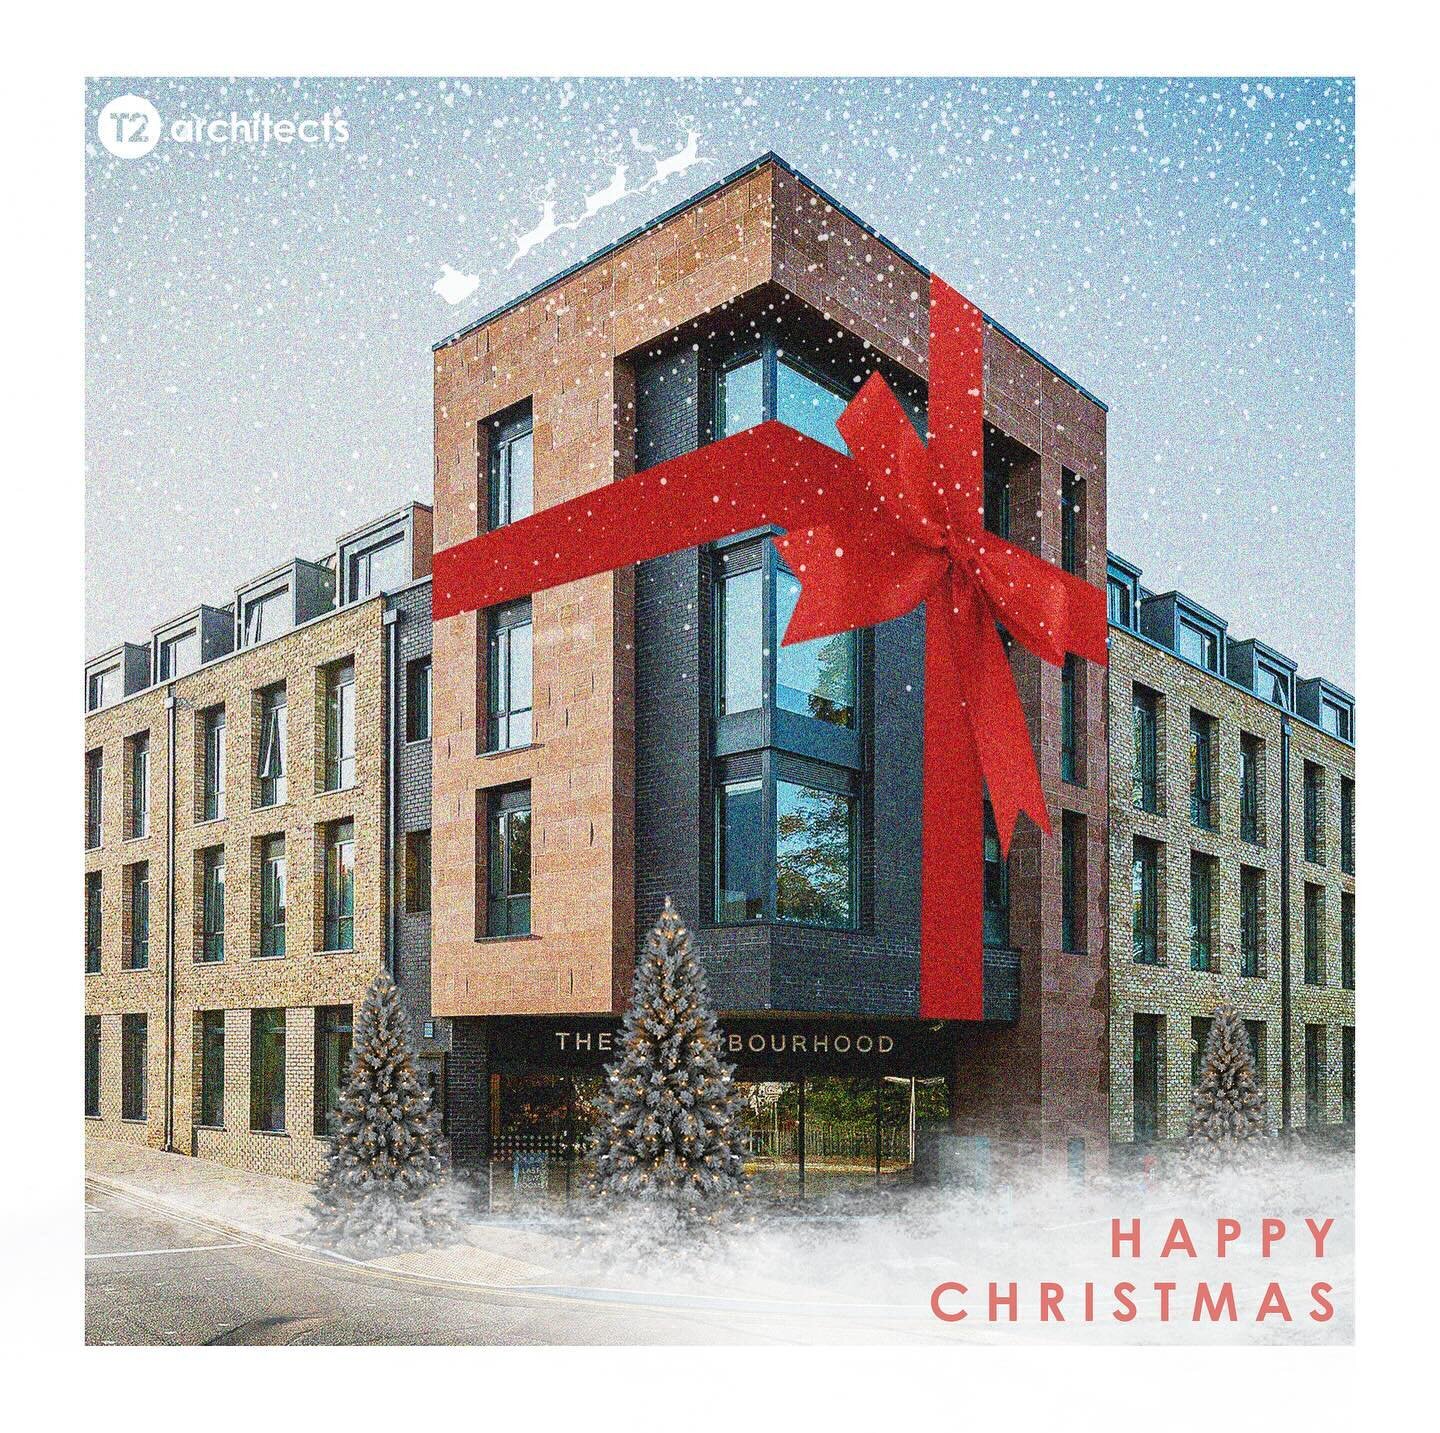 As 2023 comes to a close, we would like to thank our Clients and Collaborators for your support over the past year.

Merry Christmas from all of us at T2 Architects, and all good wishes for 2024. We look forward to continuing to work with you in the 